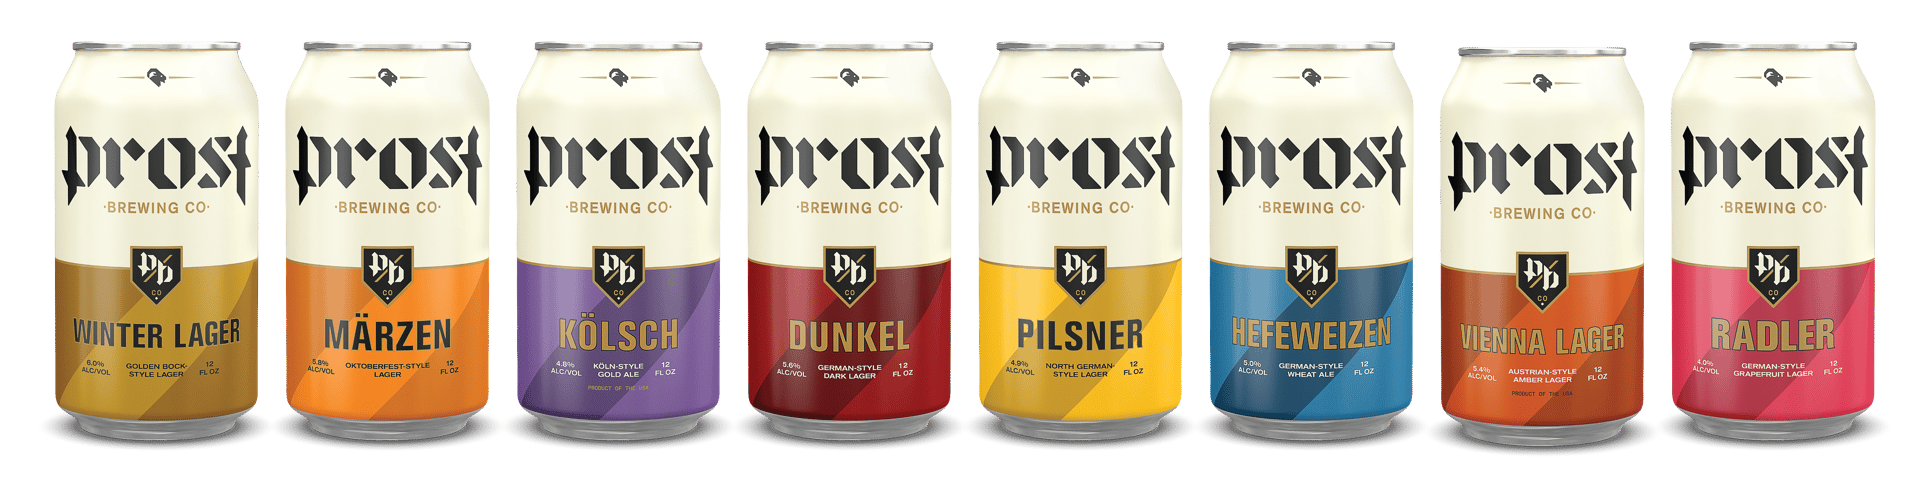 Our Colorado Brewing - Prost Biers Company in